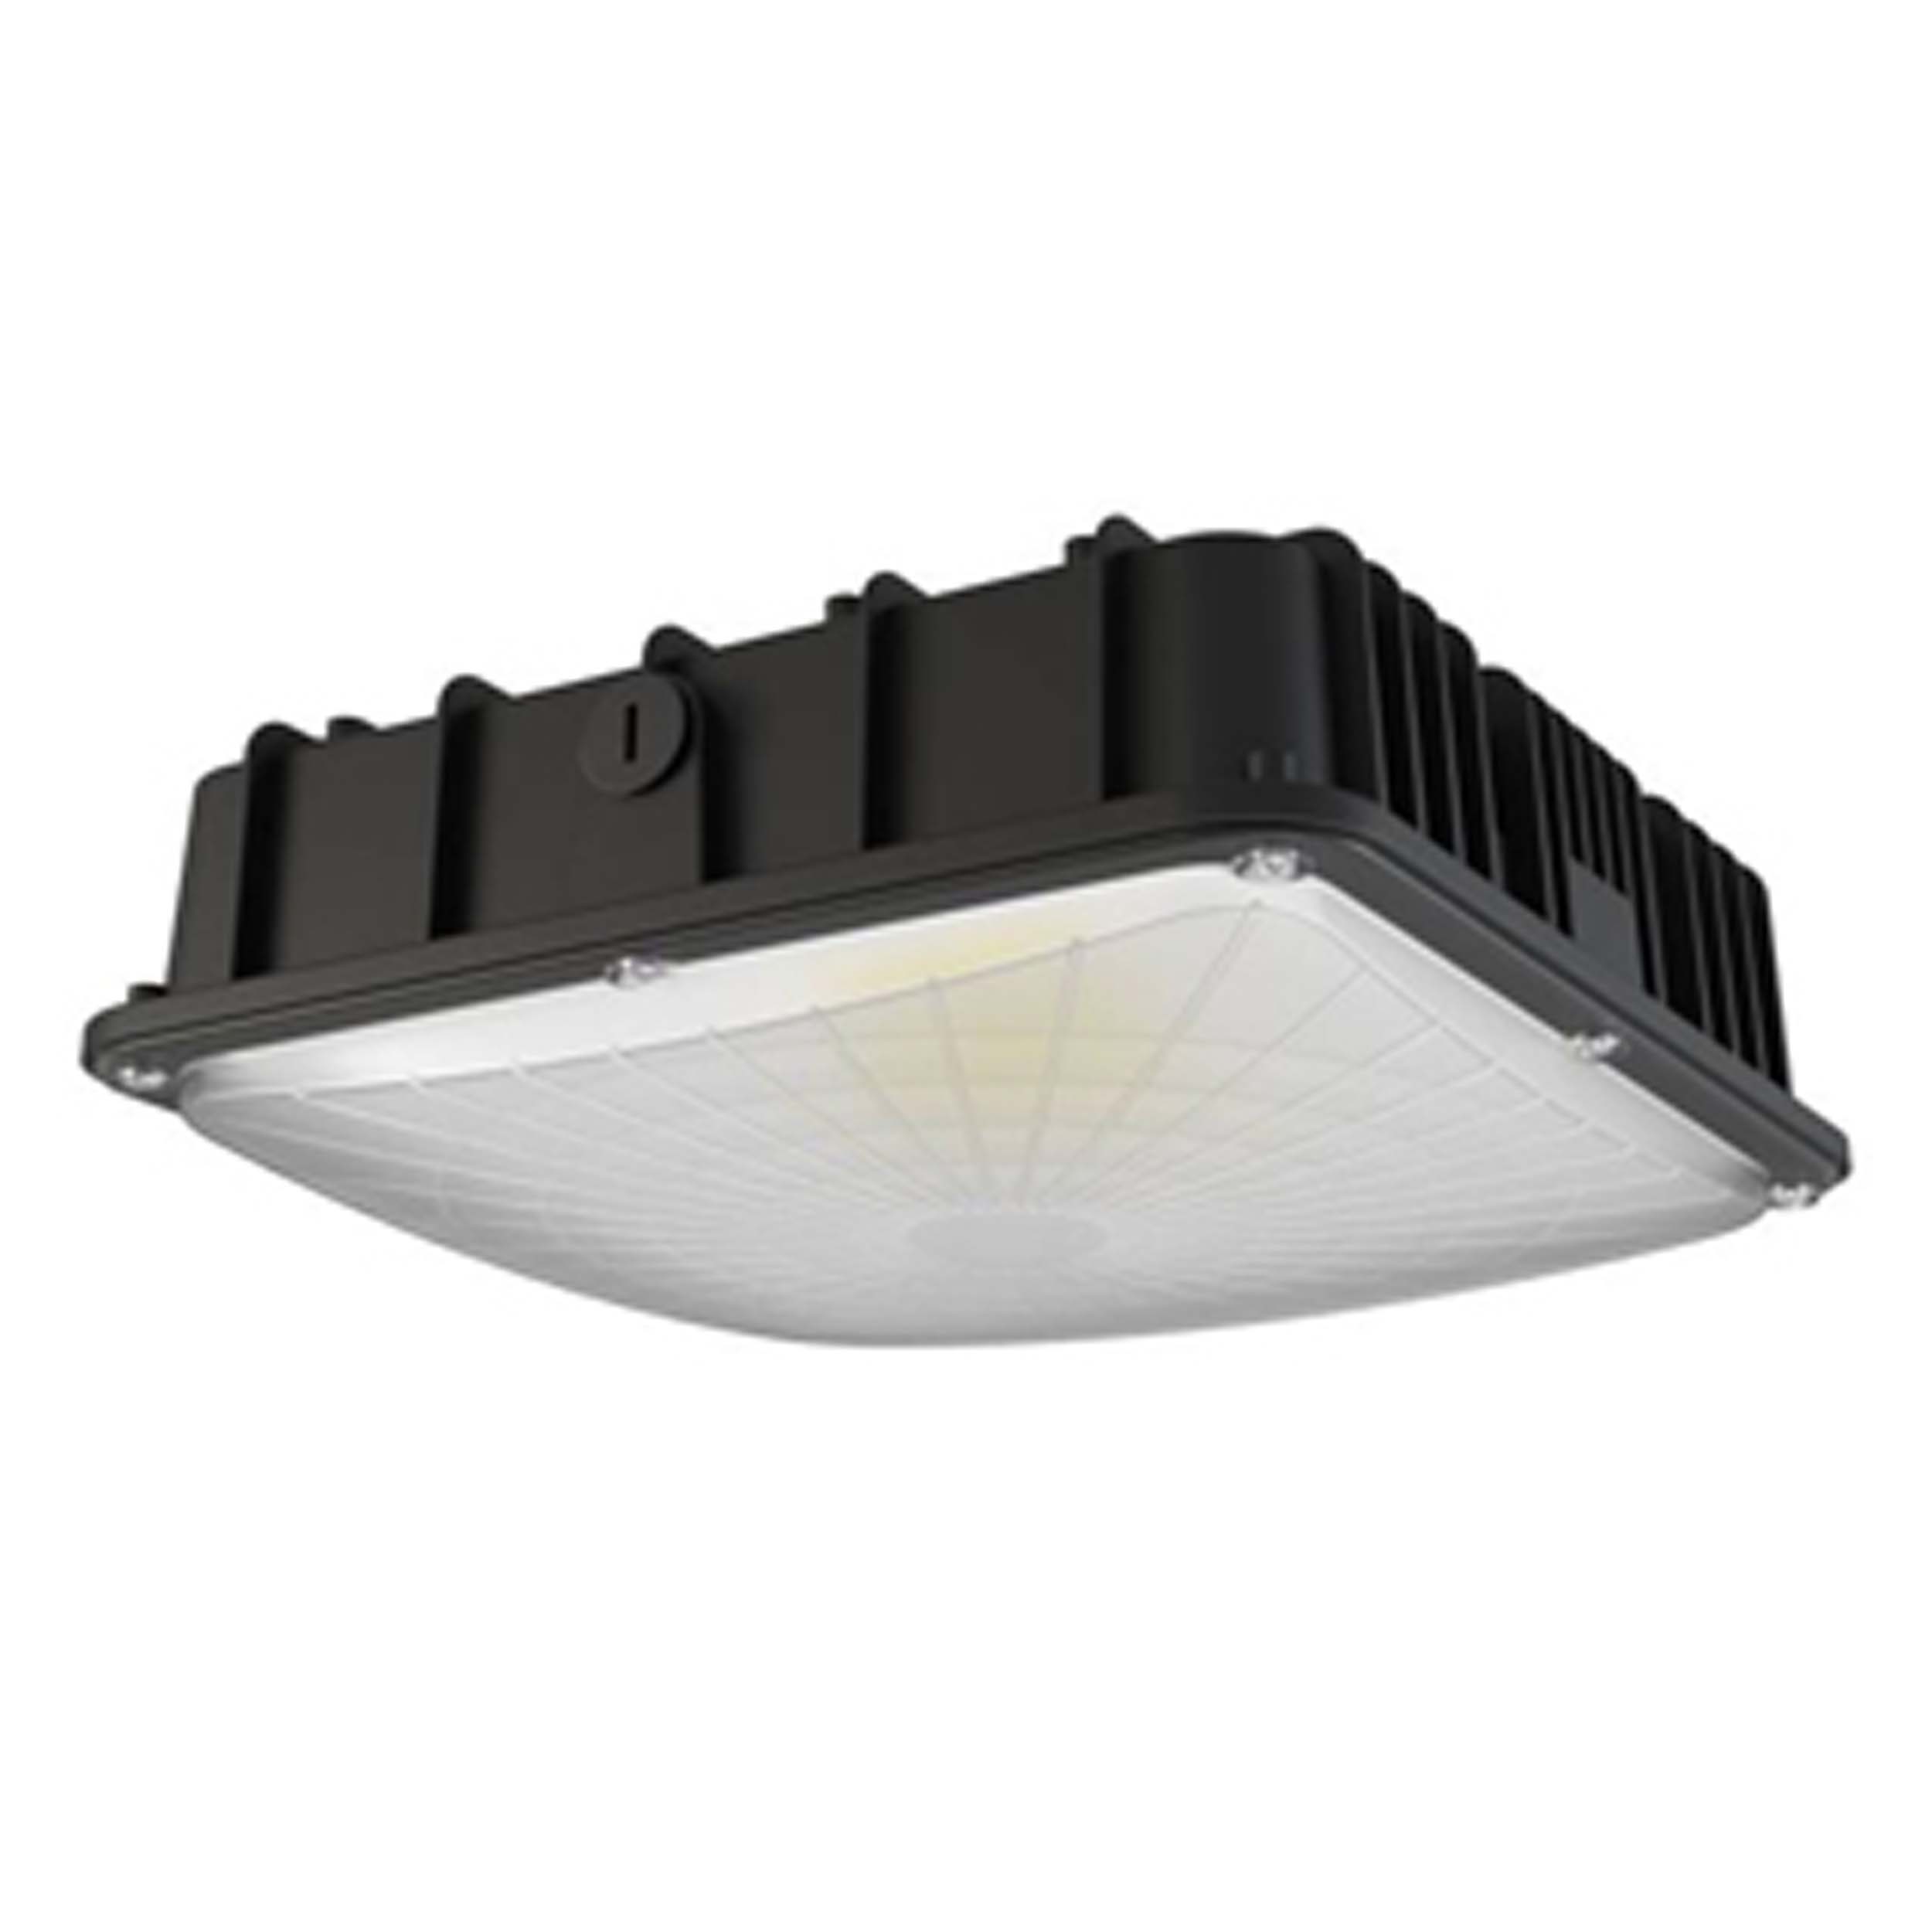 LED Canopy Lighting Fixture for Outdoor or Indoor Usage